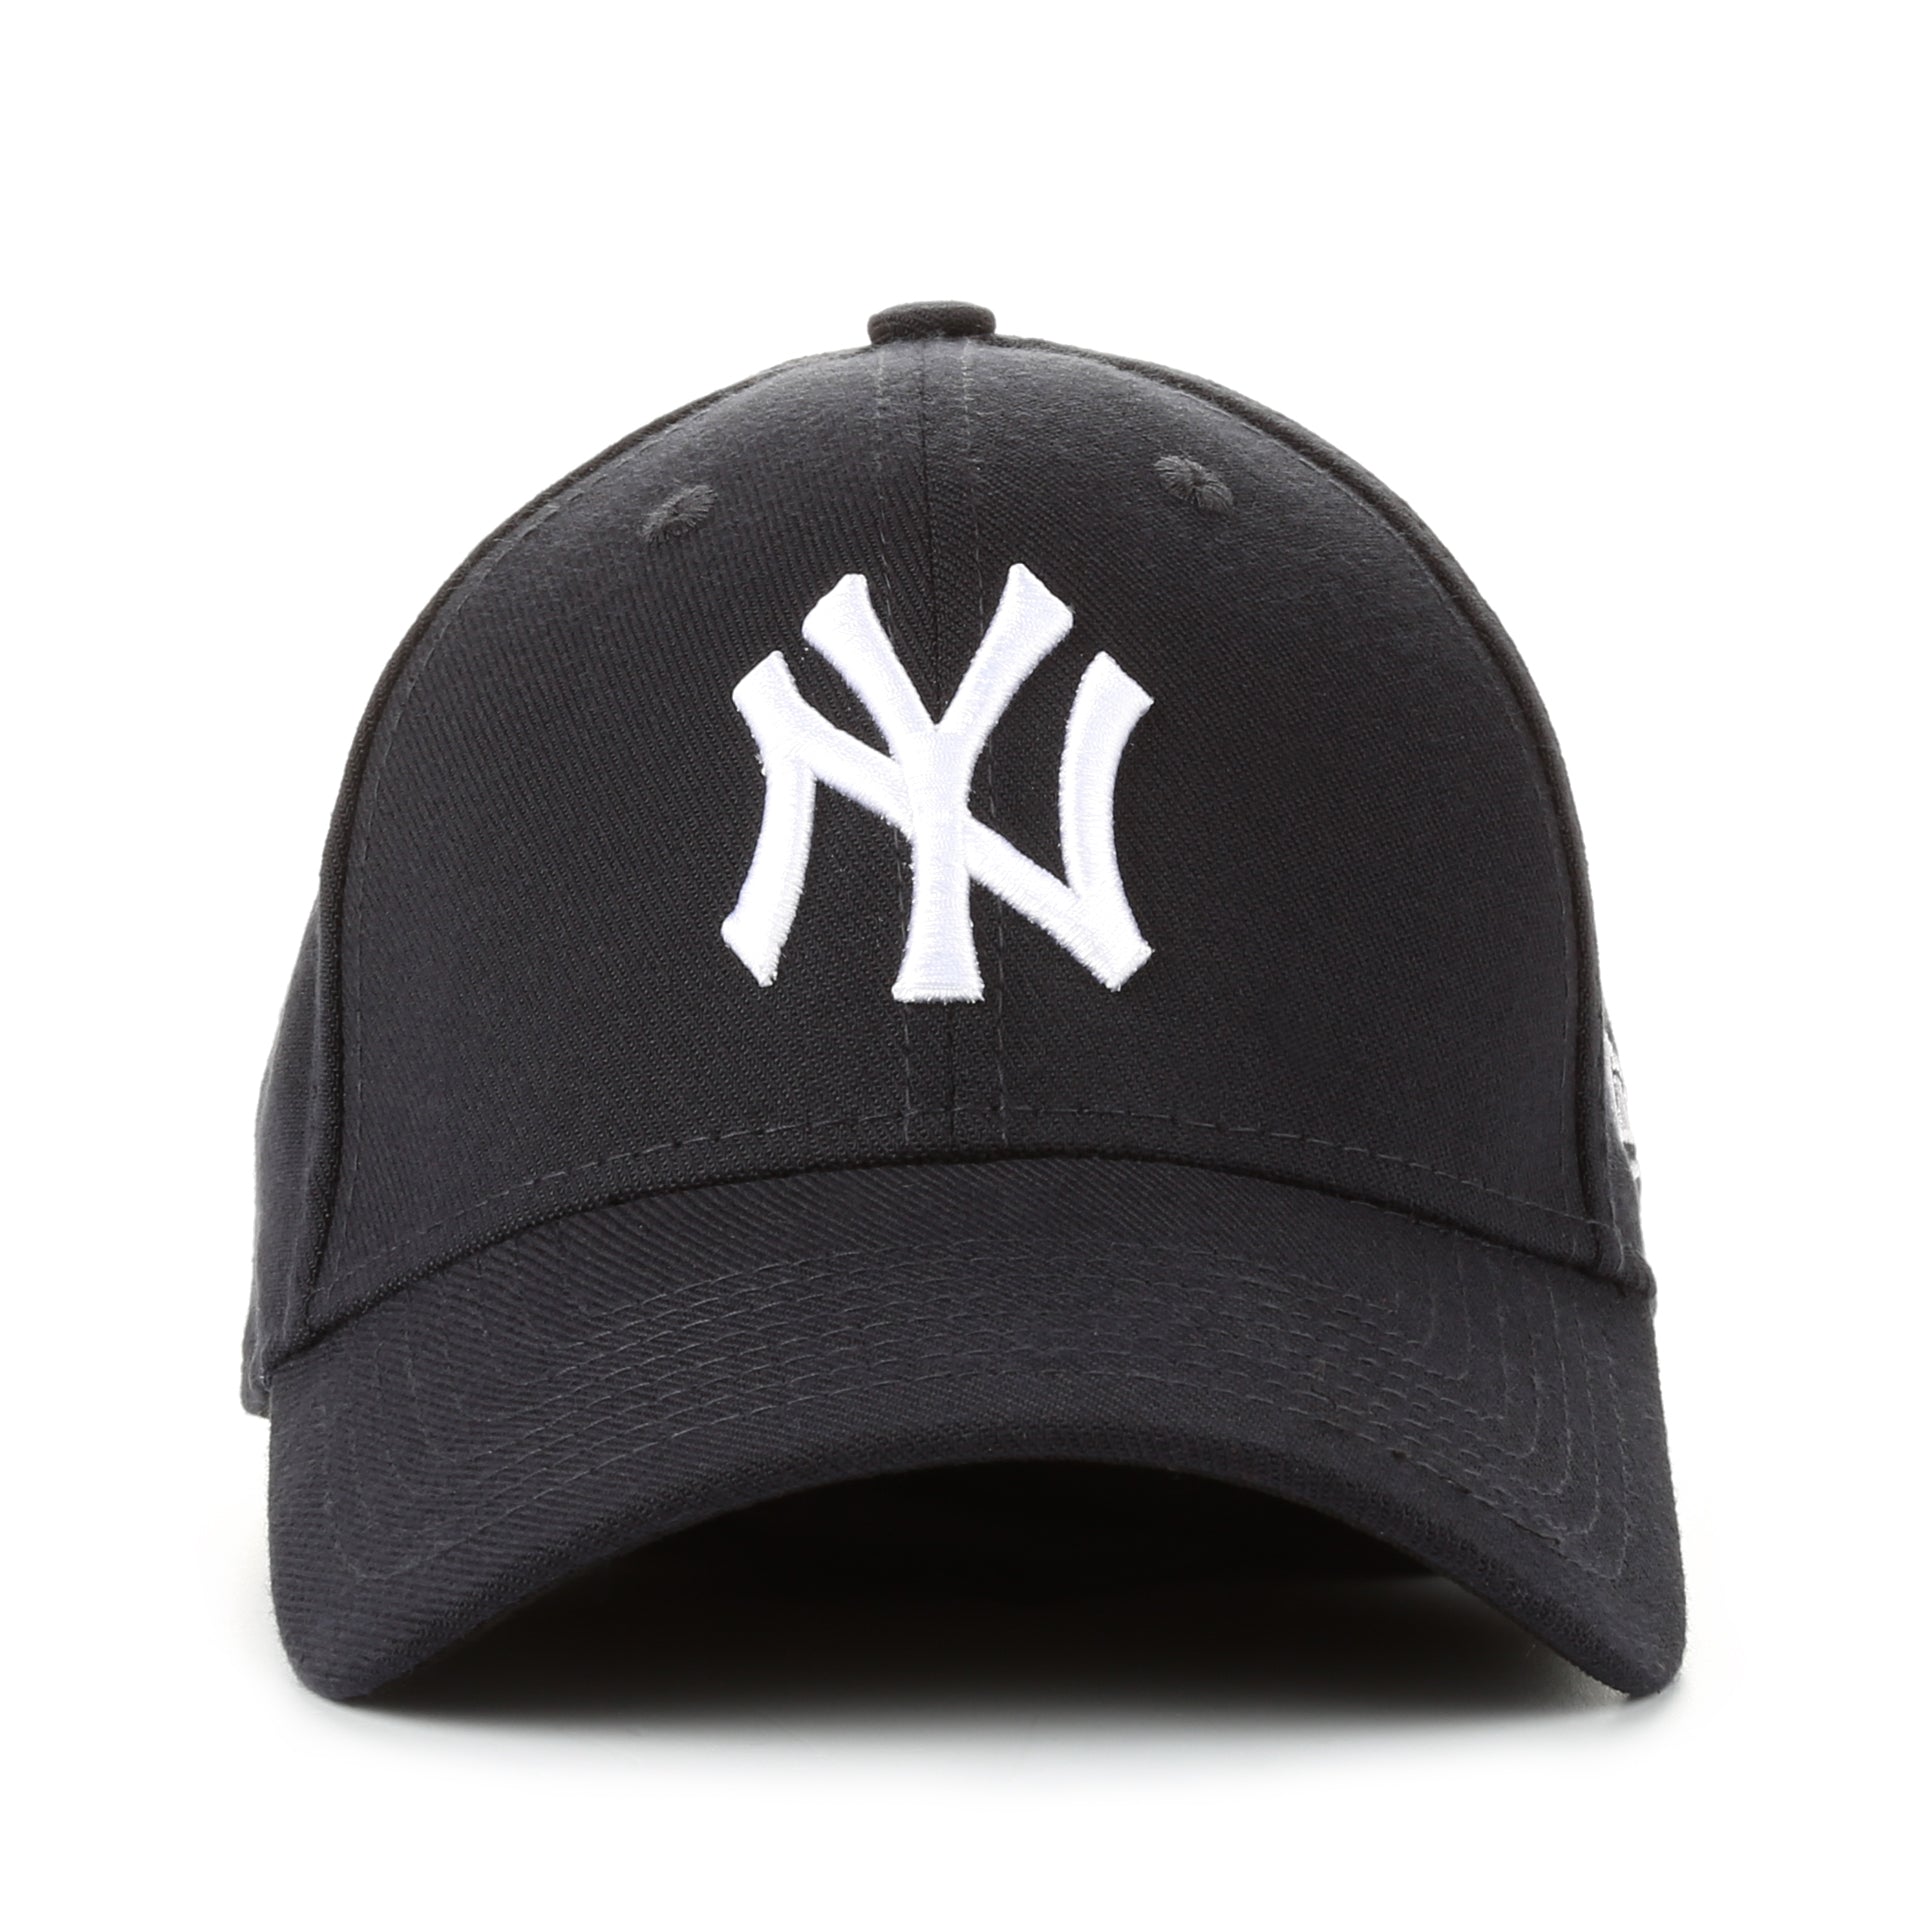 MLB All Star Game New York Yankees 39THIRTY Stretch Fit Cap